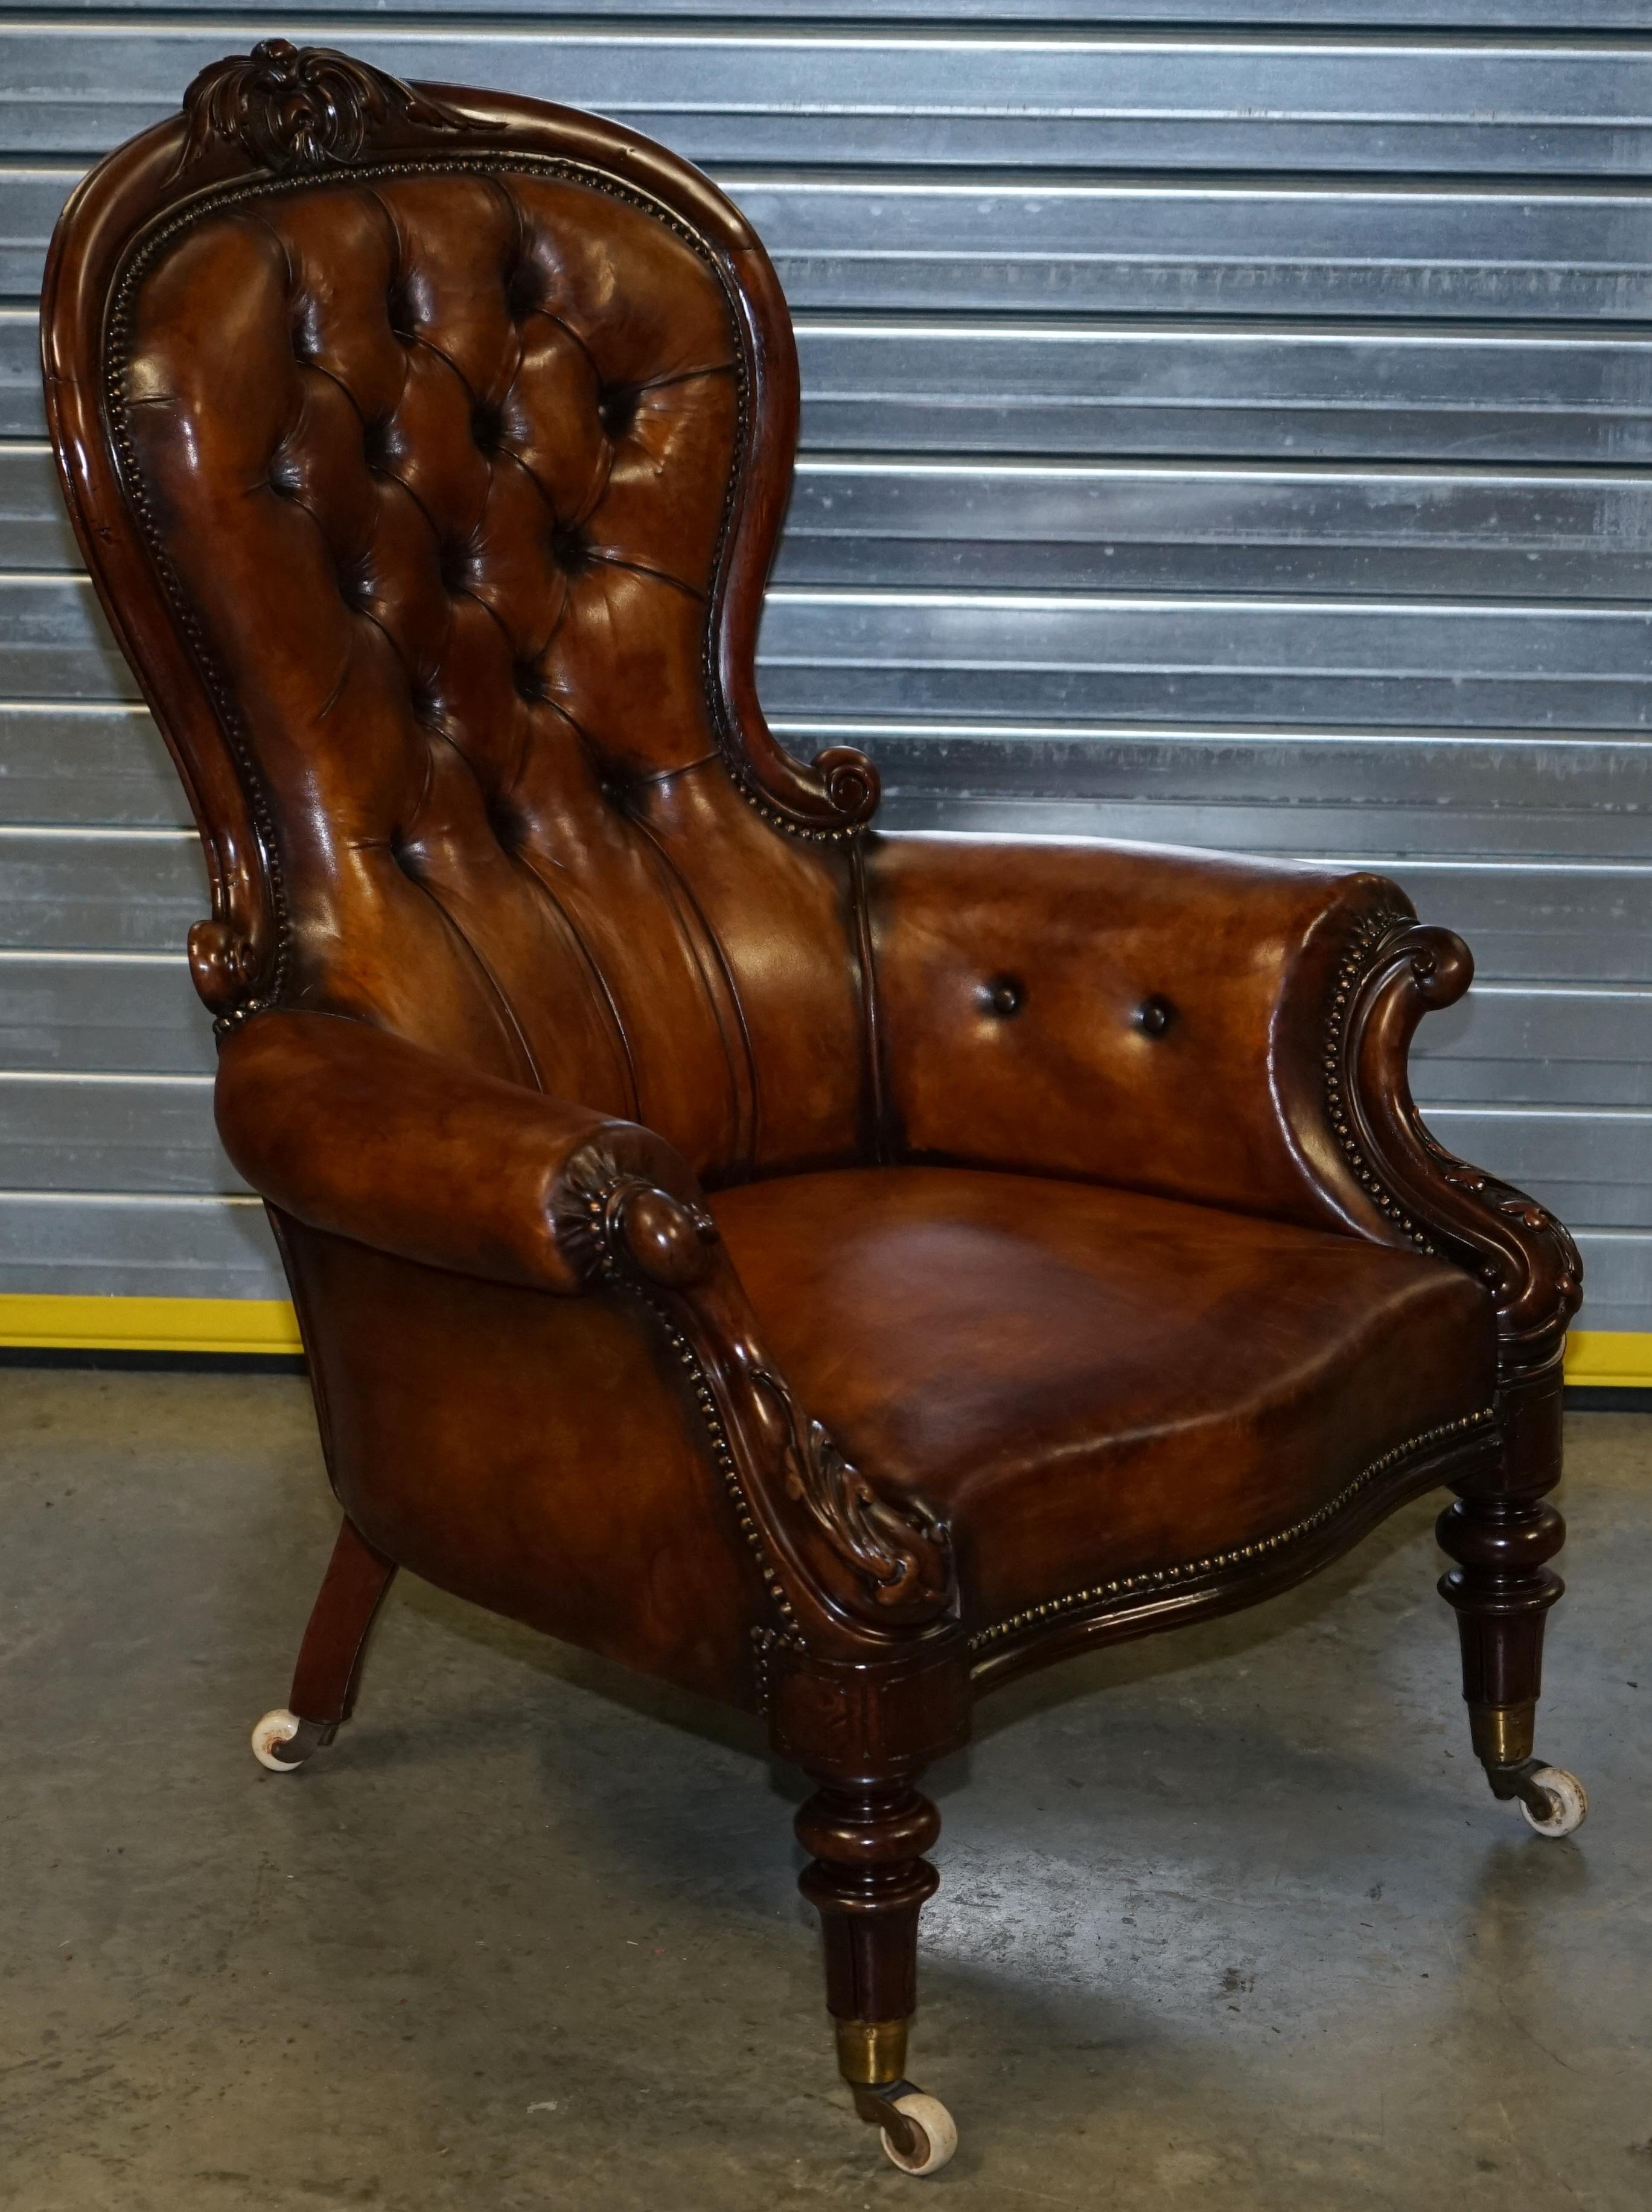 We are delighted to offer for sale this stunning fully restored Victorian spoon back armchair hand dyed this lovely whiskey brown colour

A good looking and well made piece, the chair is fully sprung to the seat base which is a sign of extreme